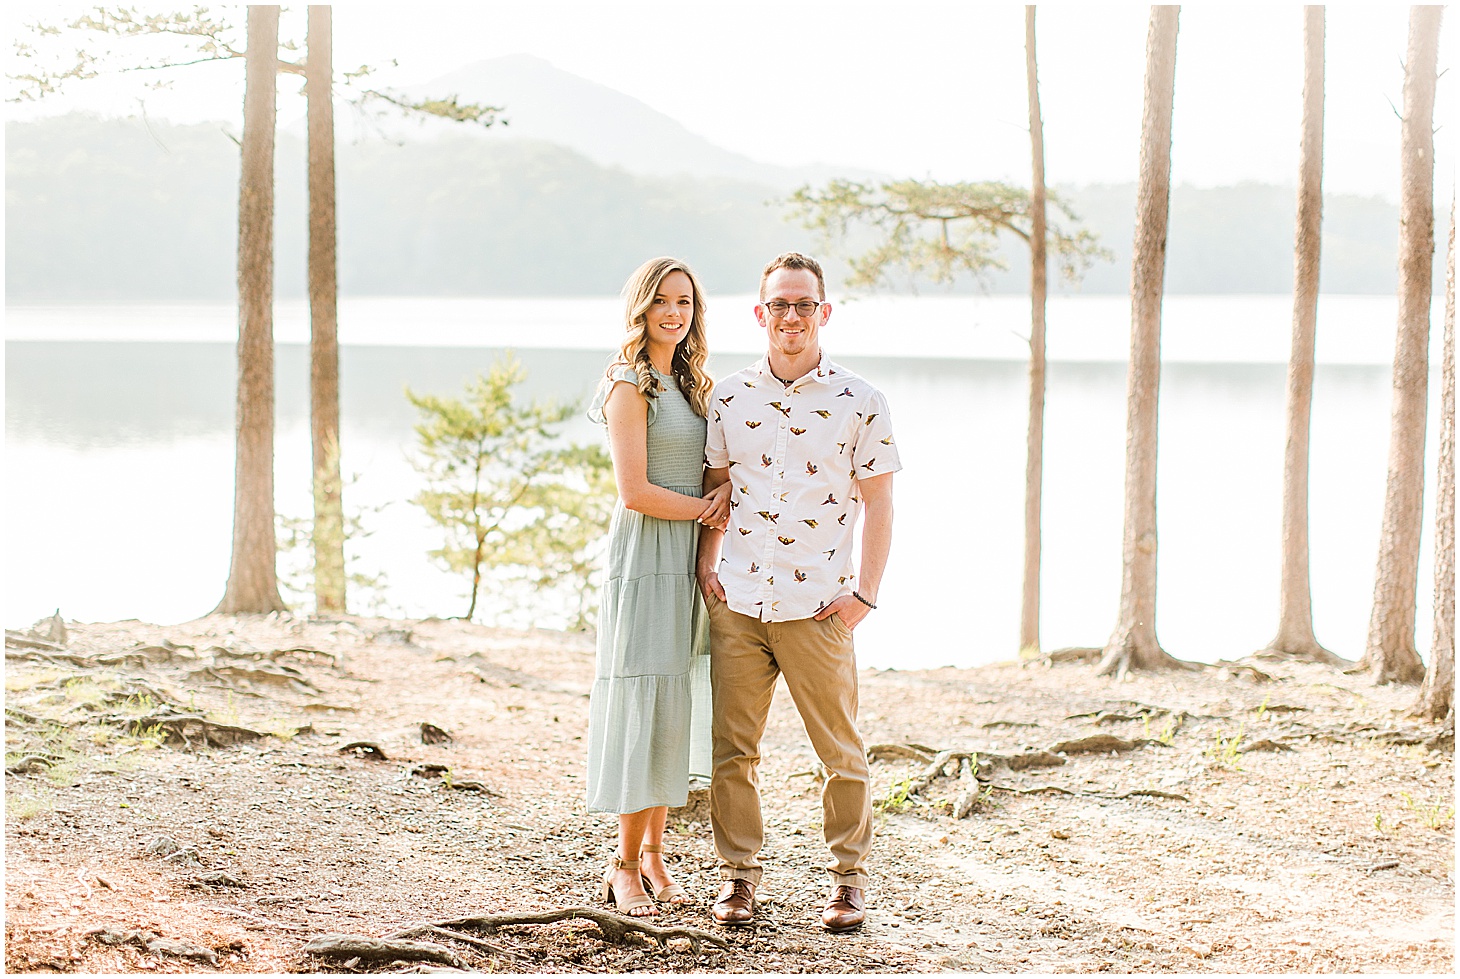 carvinscove_roanokeengagementsession_virginiaweddingphotographer_vaweddingphotographer_photo_0002.jpg